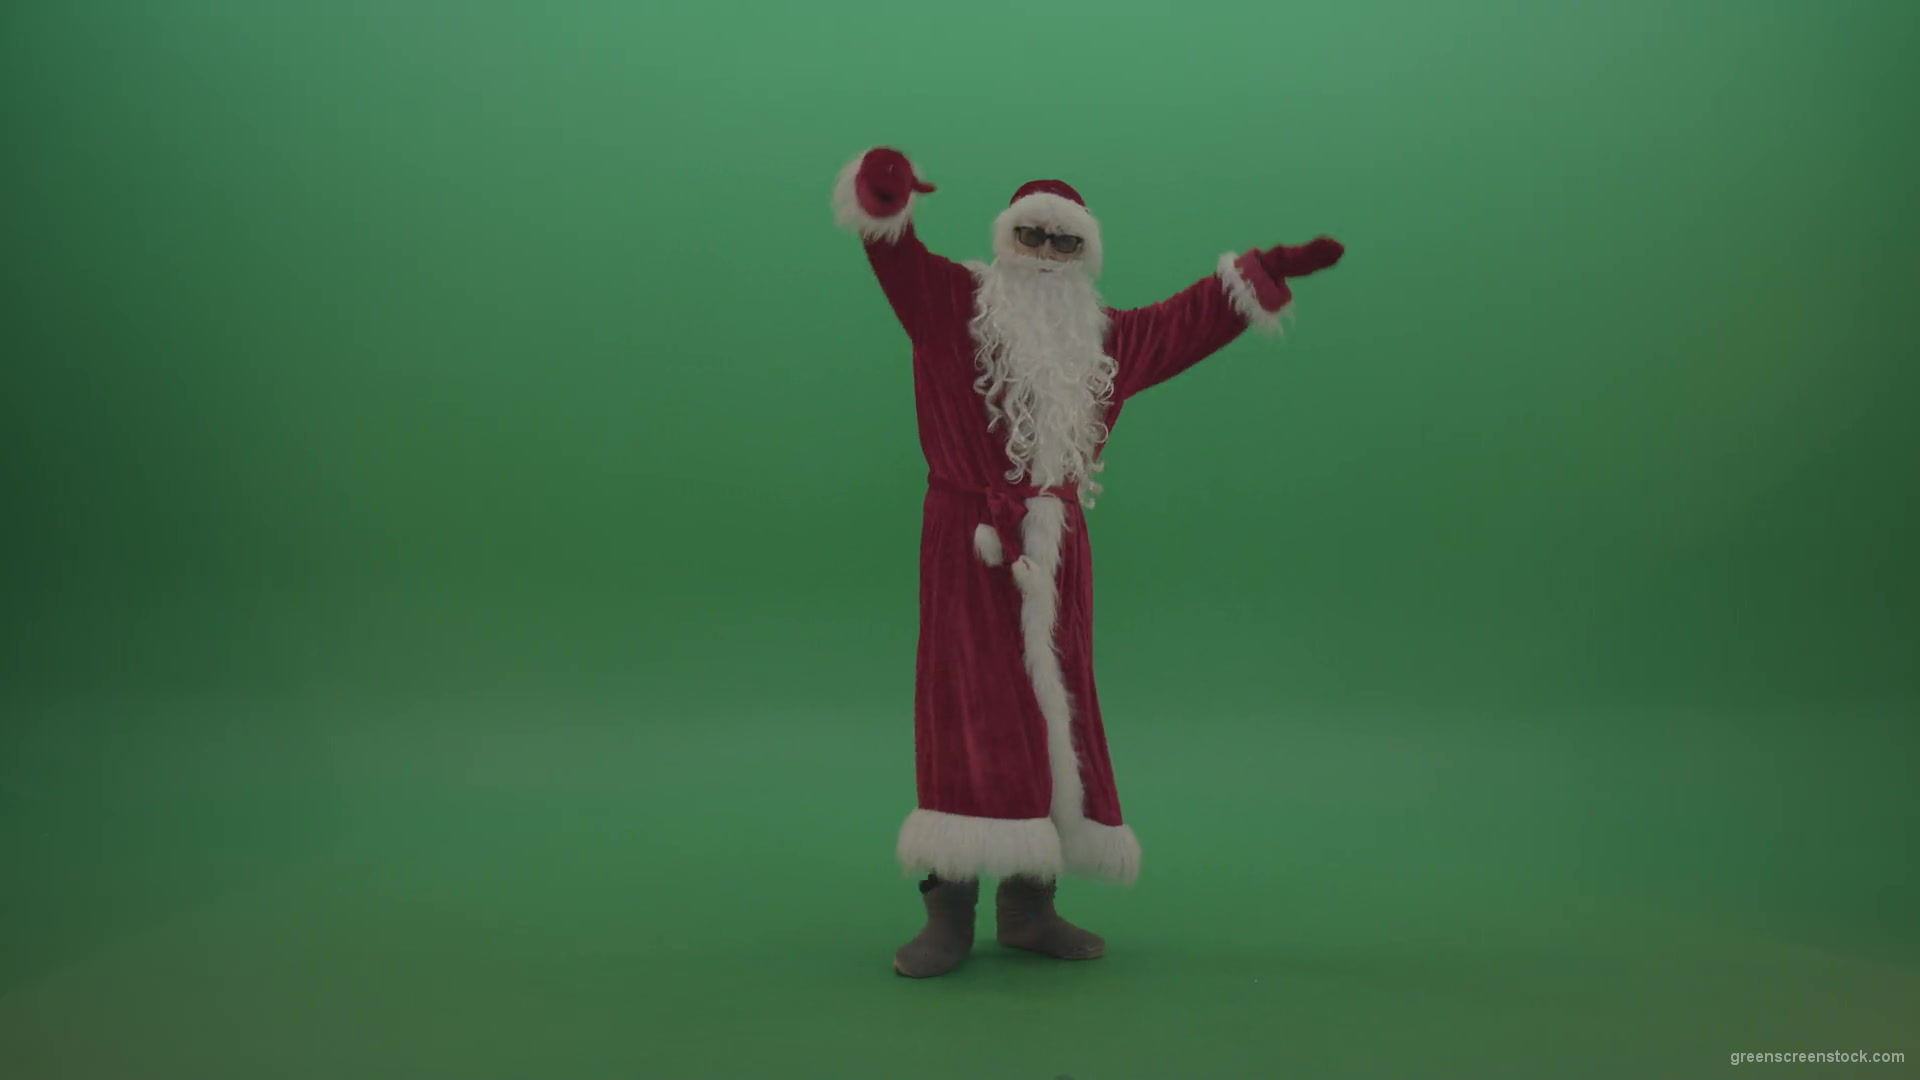 Santa-with-much-swagger-over-the-green-screen-background-1920_007 Green Screen Stock